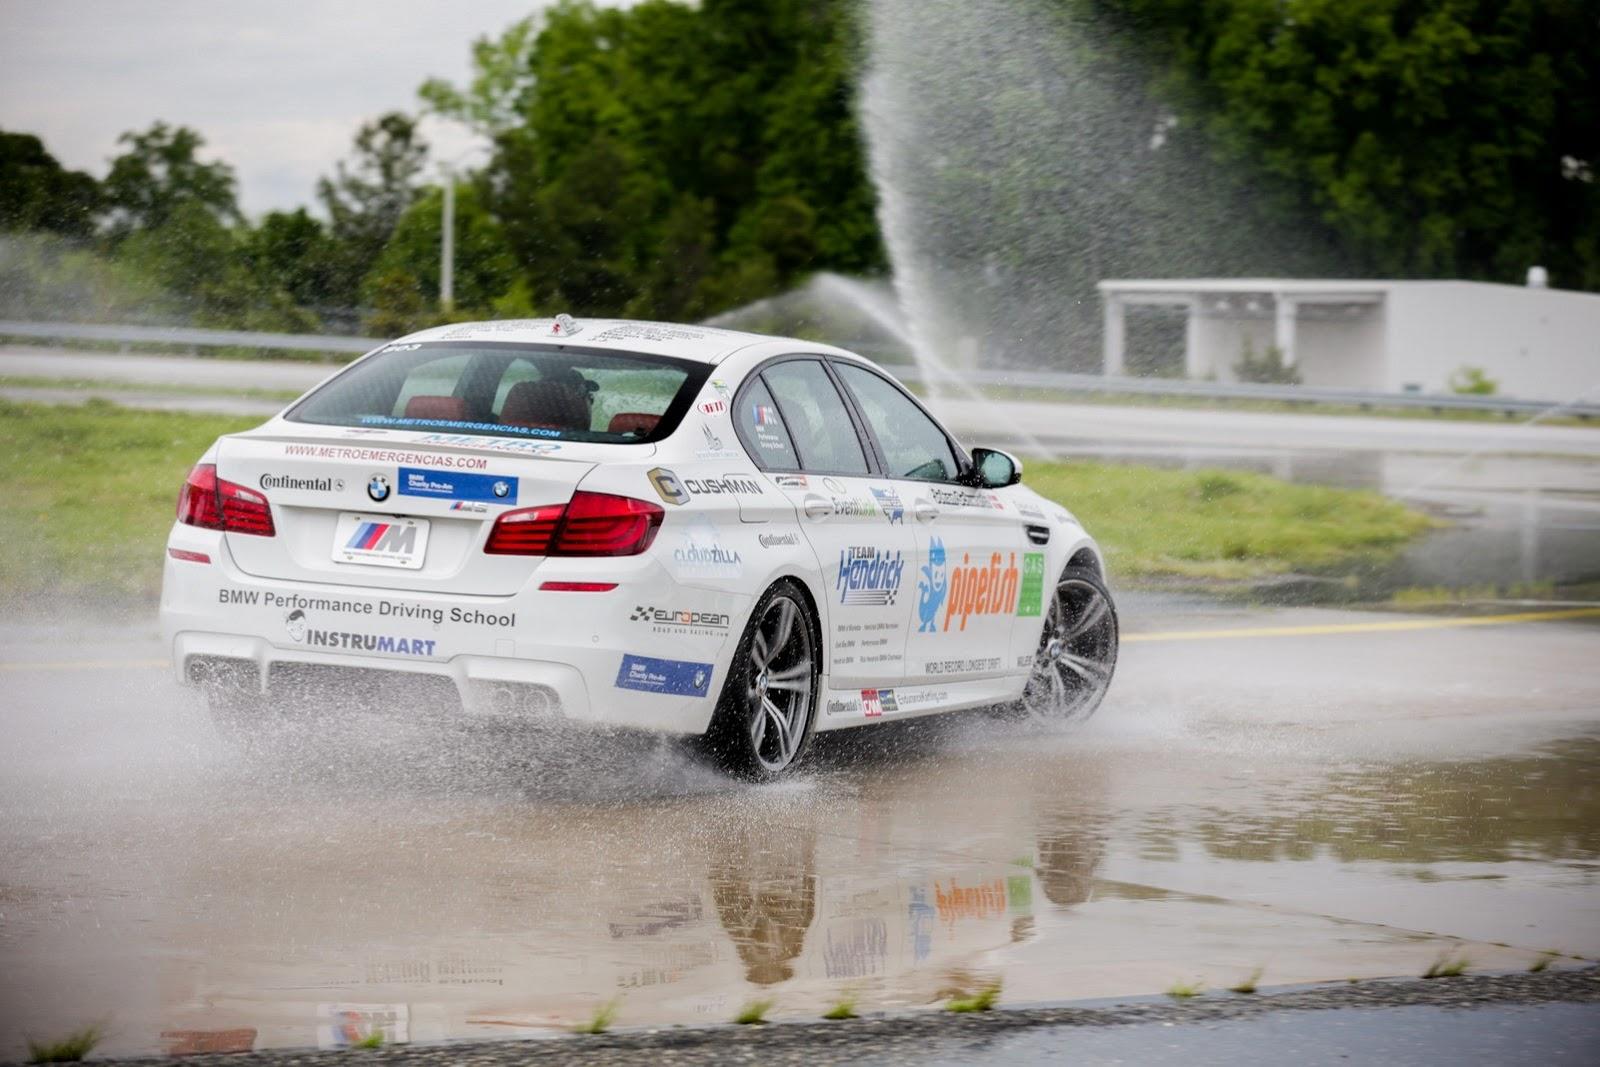 BMW M5 drifts 82km to reset world record, for charity